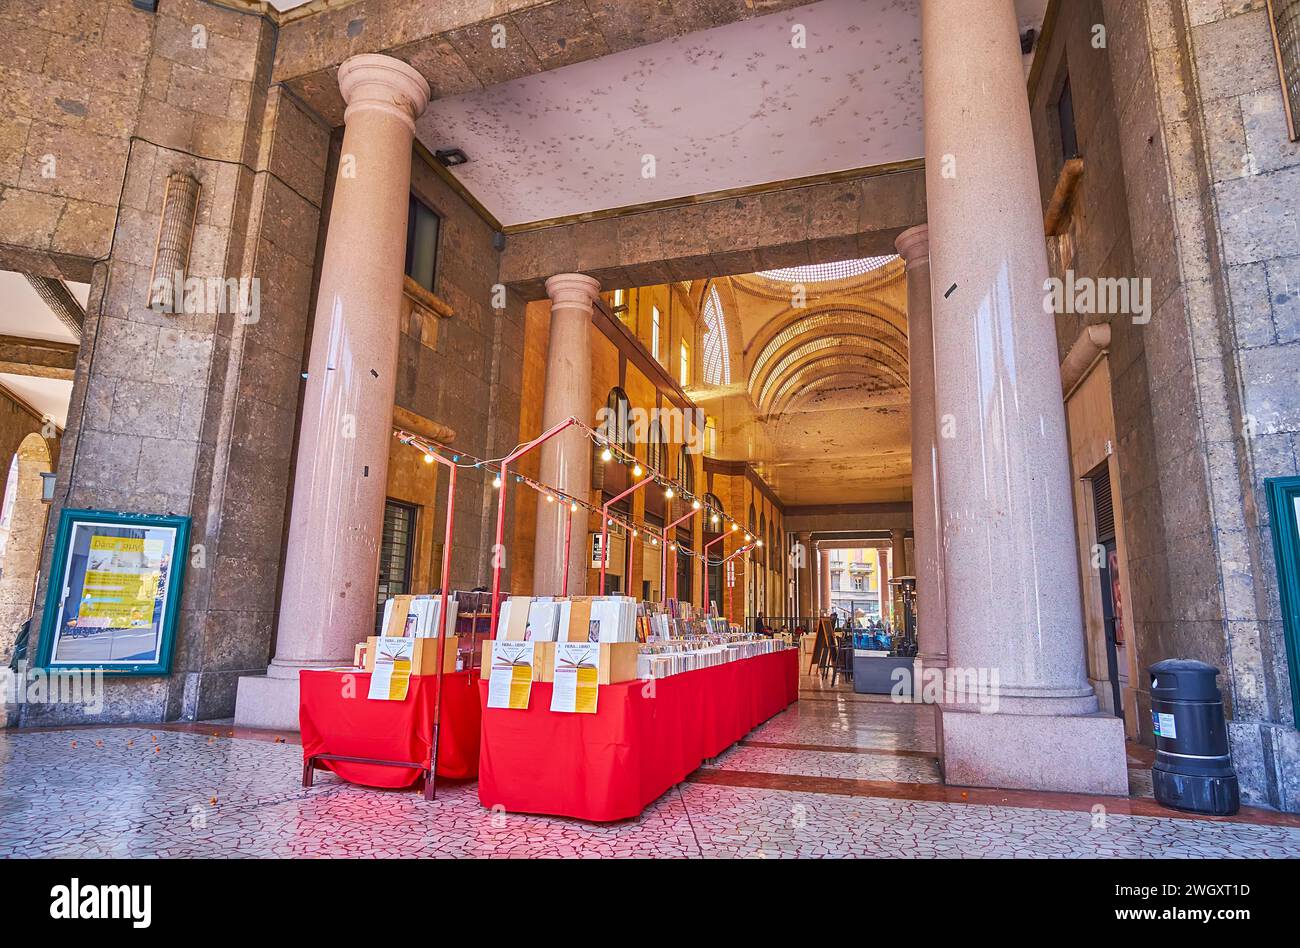 CREMONA, ITALY - APRIL 6, 2022: The stone hall of Galleria XXV Aprile with stalls of book market and tall massive stone columns, Cremona, Italy Stock Photo